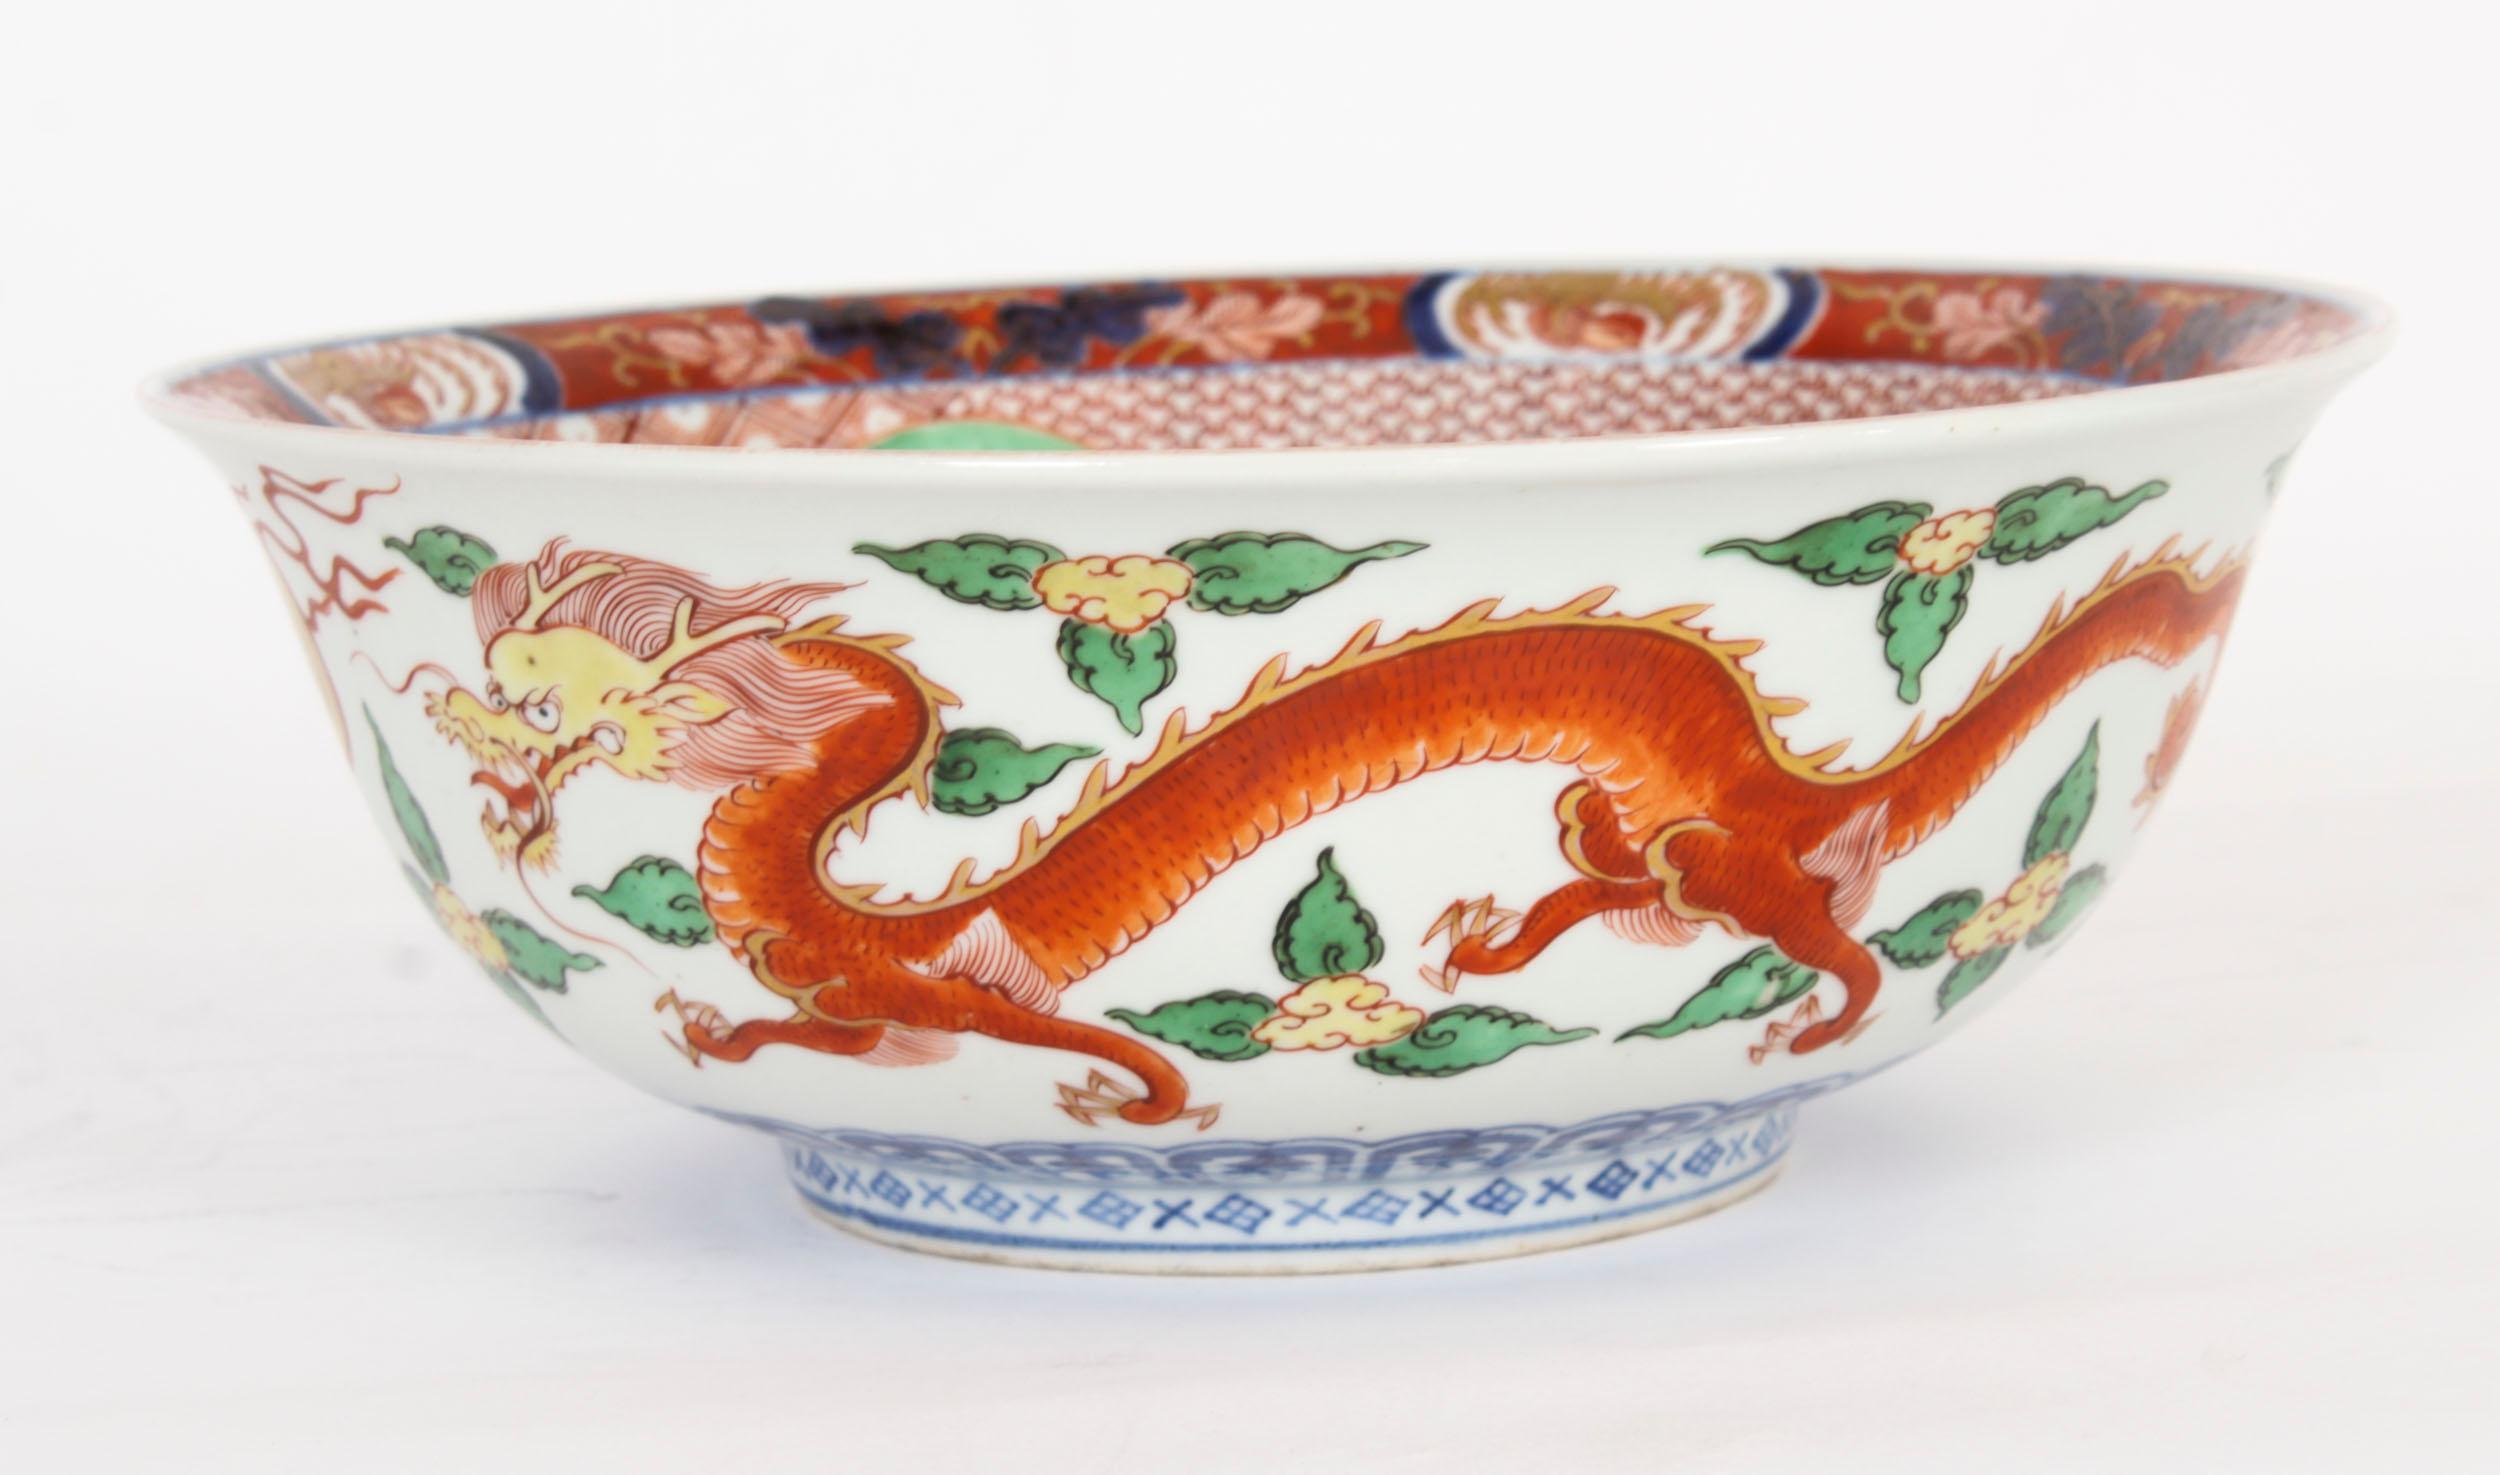 A large beautiful Chinese export porcelain centre bowl, dating from circa 1890.

The circular bowl is in the Imari palette and features enamelled decoration with panels of dragons, kylins, bats and phoenix within key fret and dense foliate borders